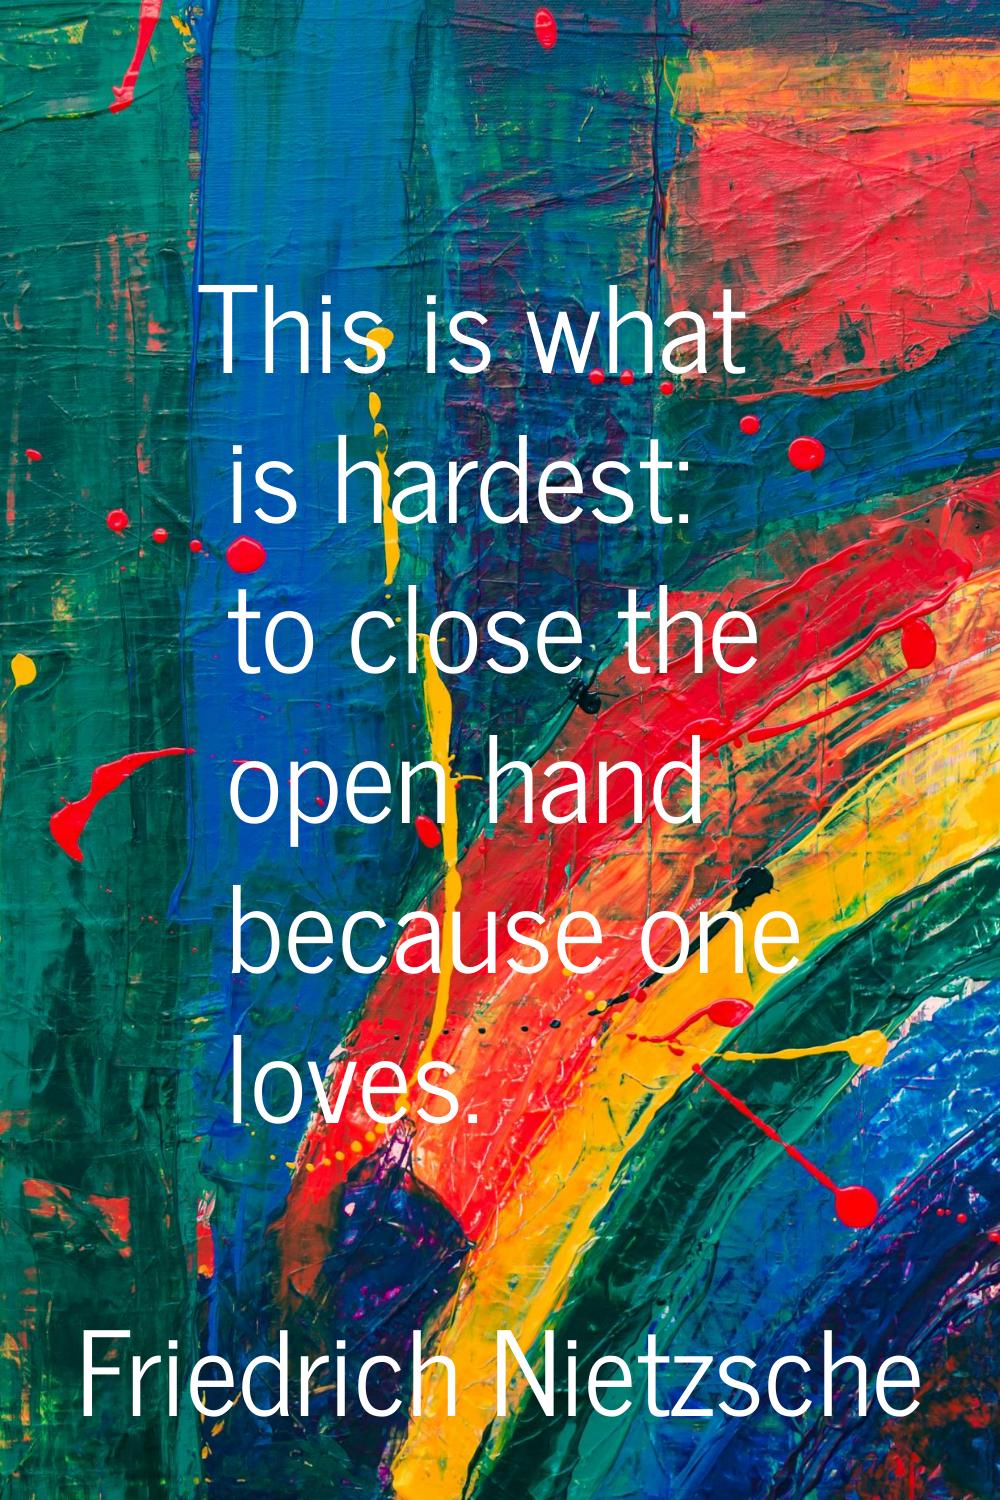 This is what is hardest: to close the open hand because one loves.